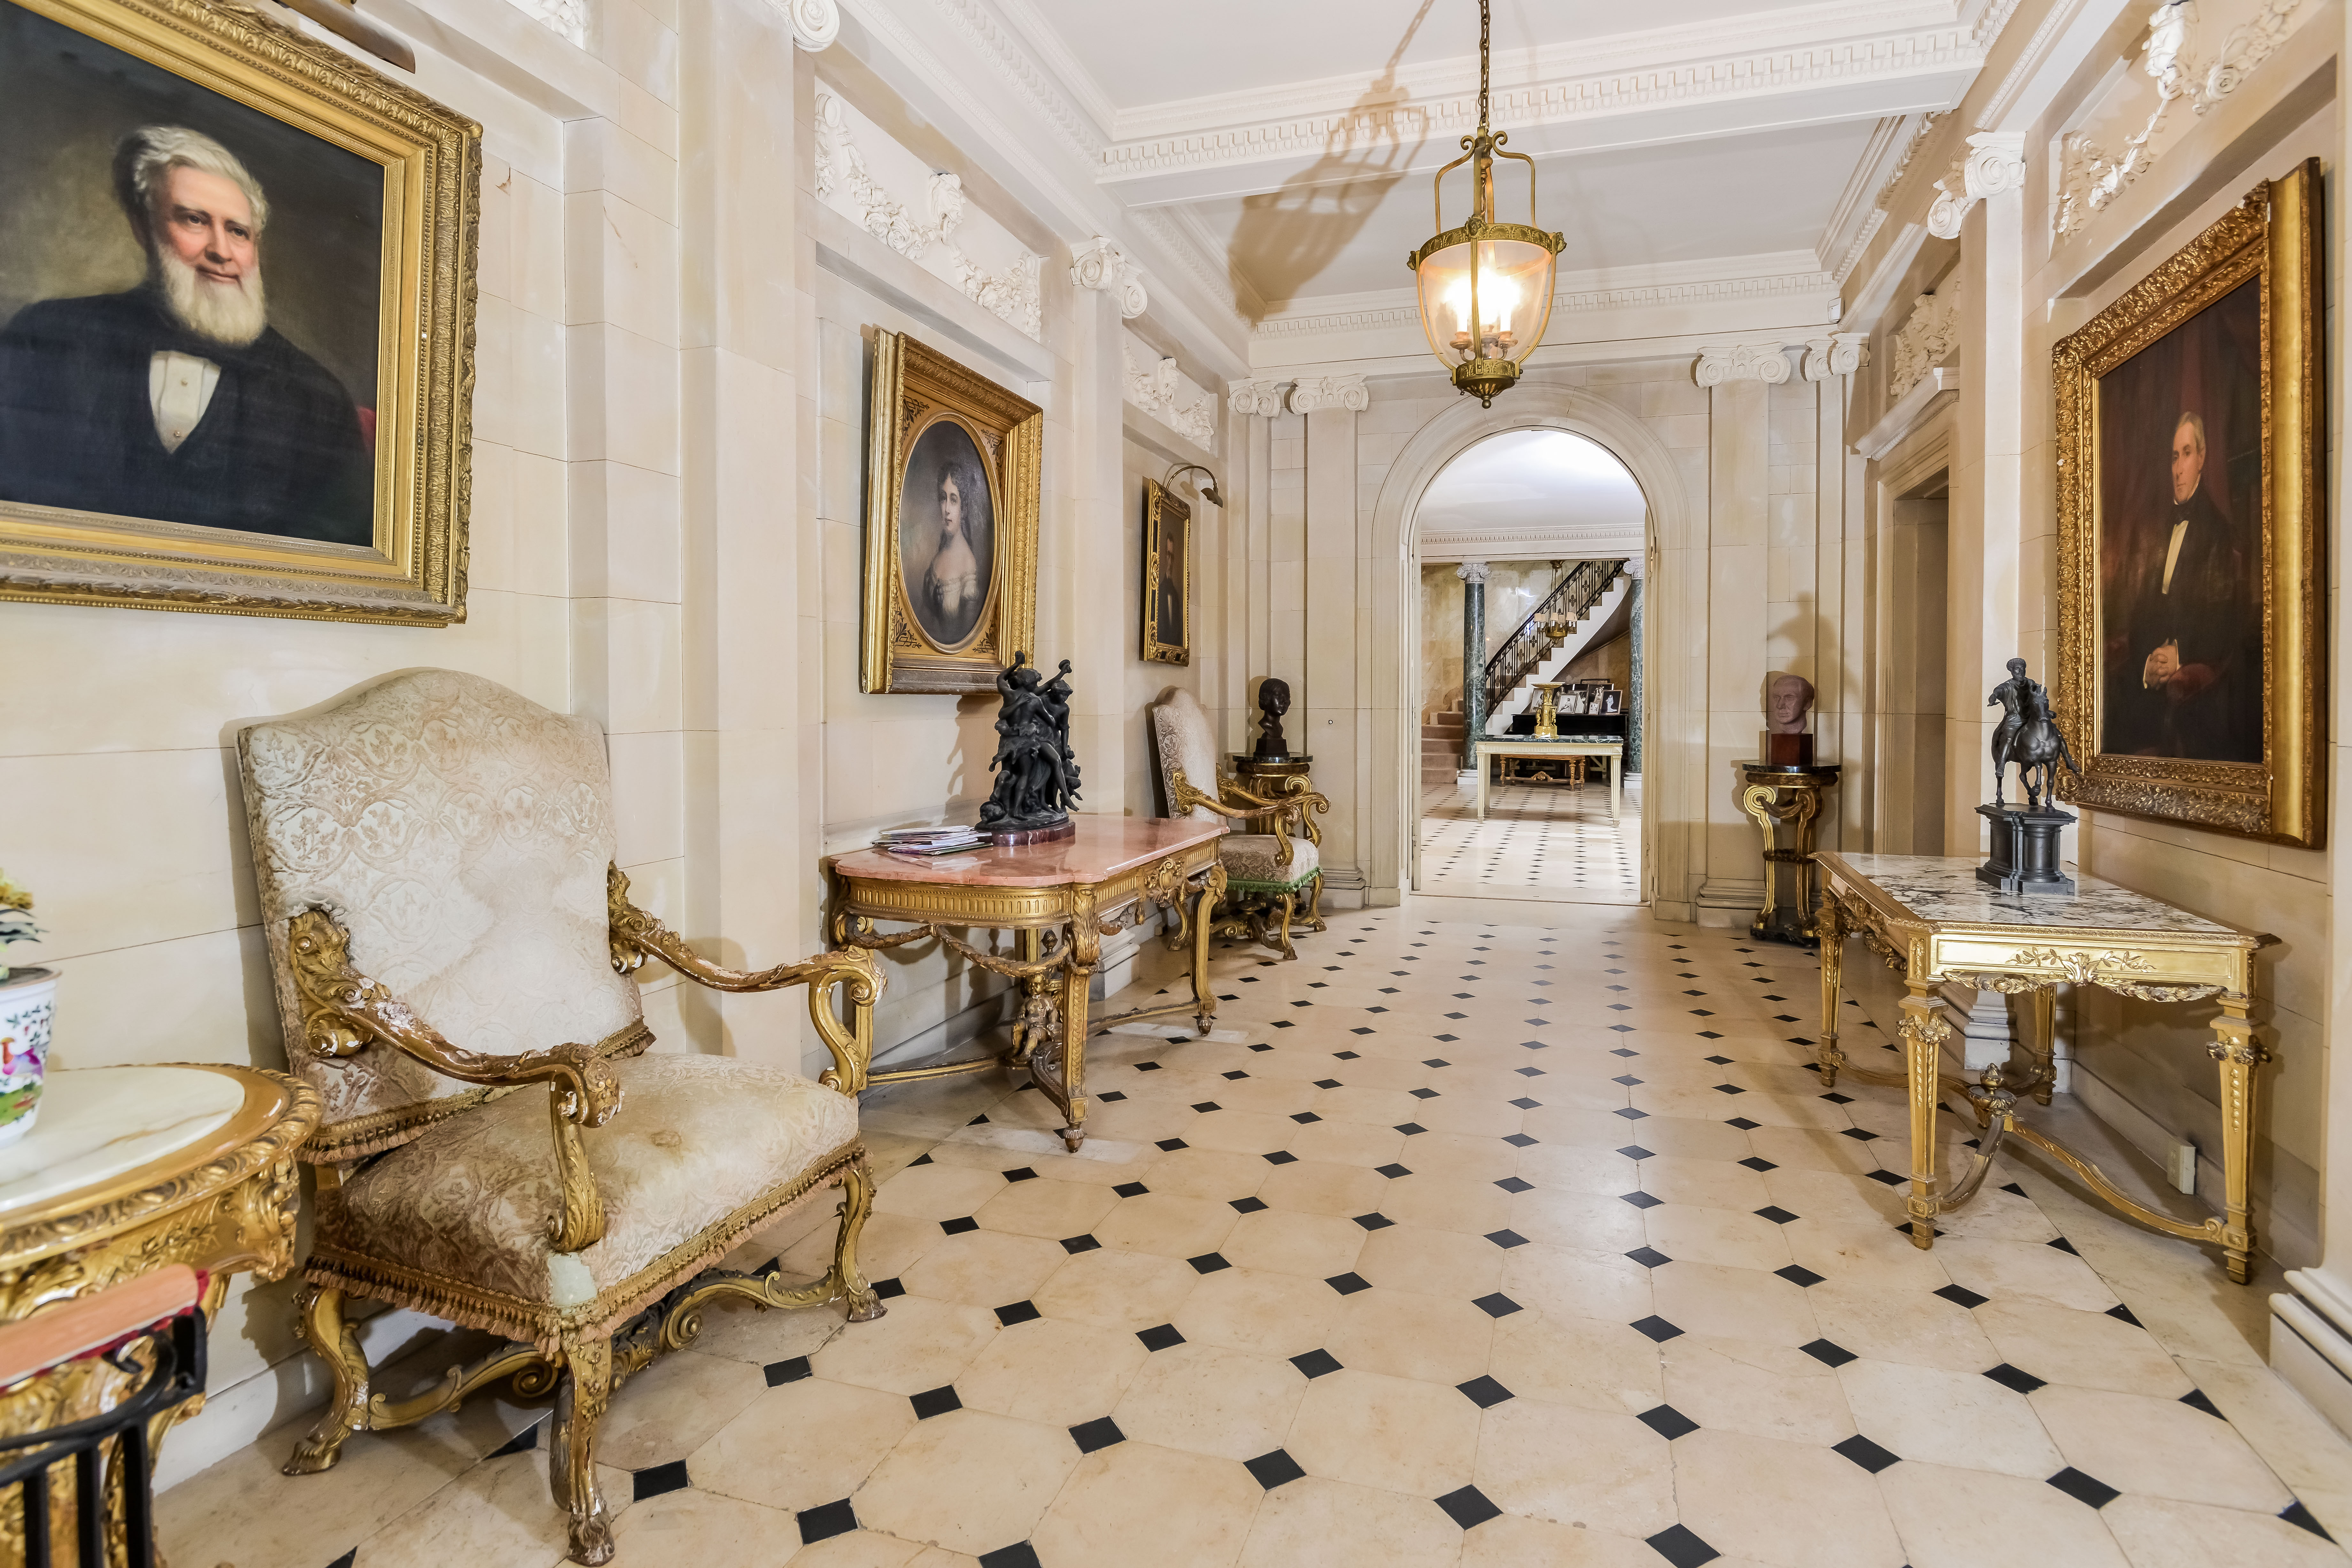 GREAT and GRAND: 5 ESTATES of THE GILDED AGE